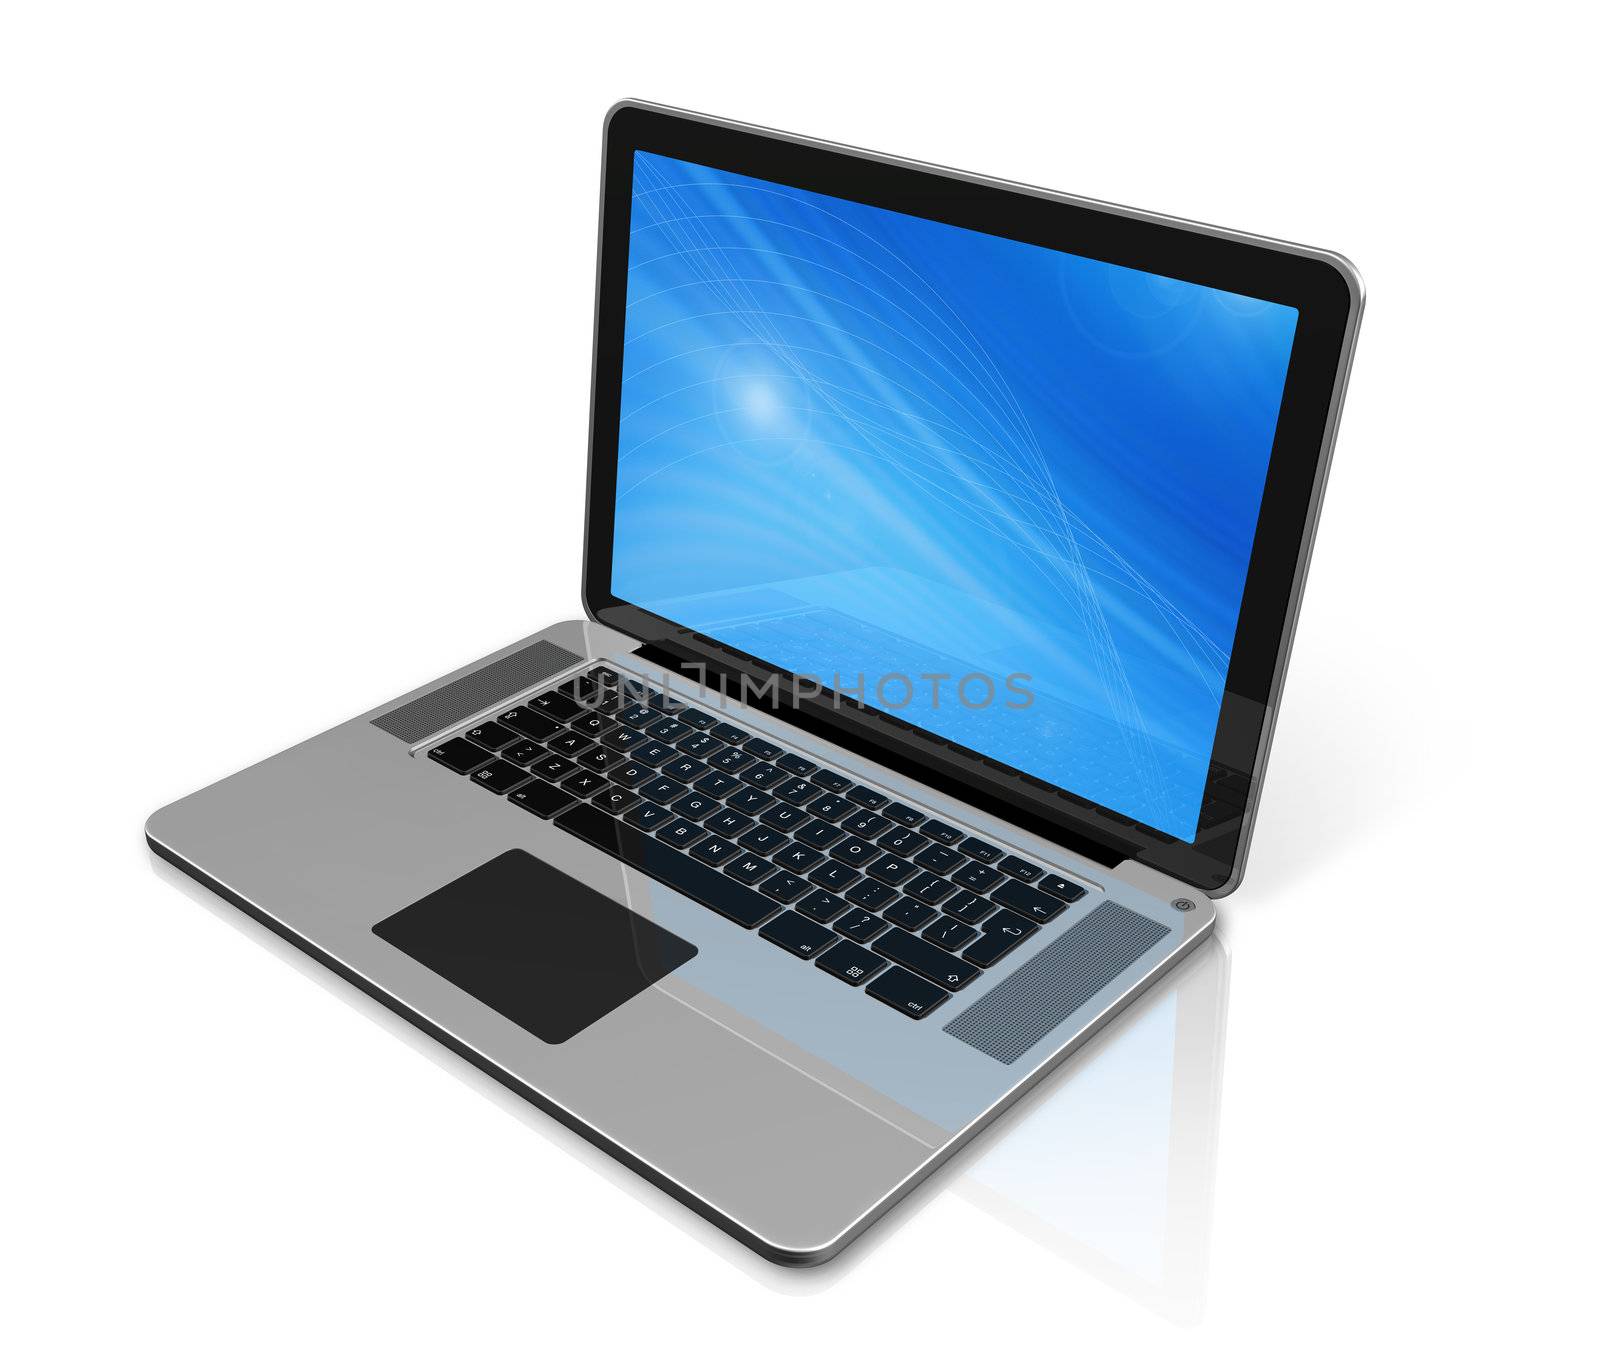 3D laptop computer isolated on white with 2 clipping path : one for global scene and one for the screen